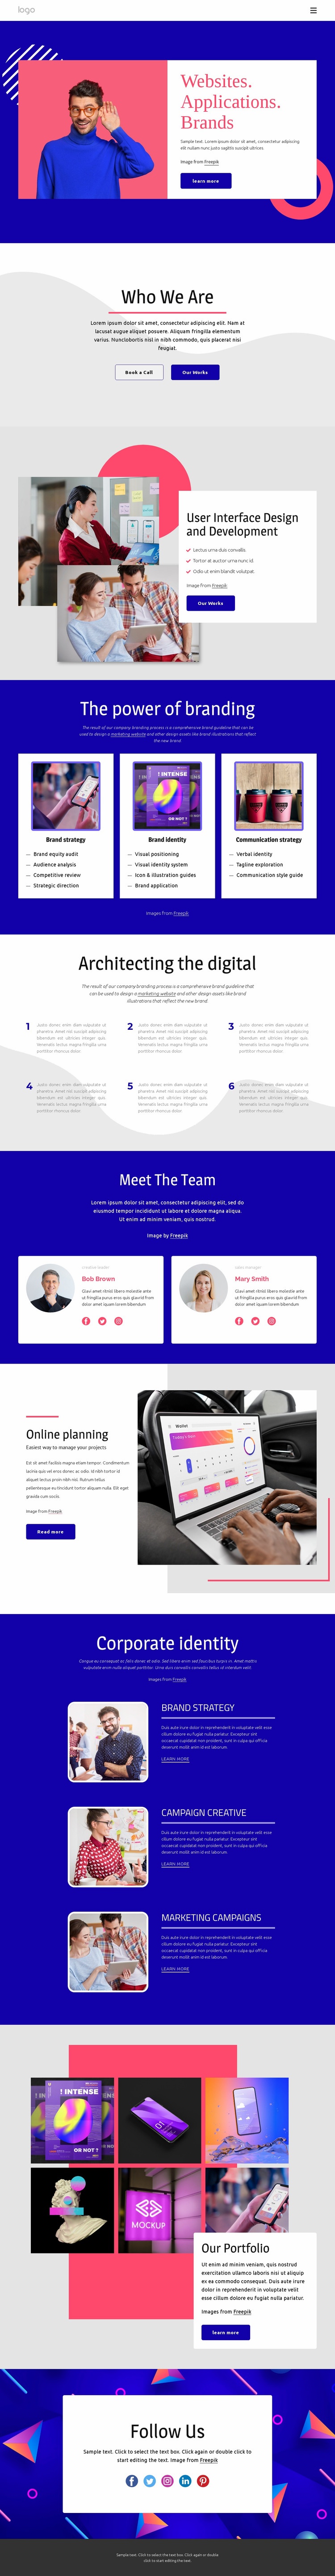 Websites and applications Homepage Design